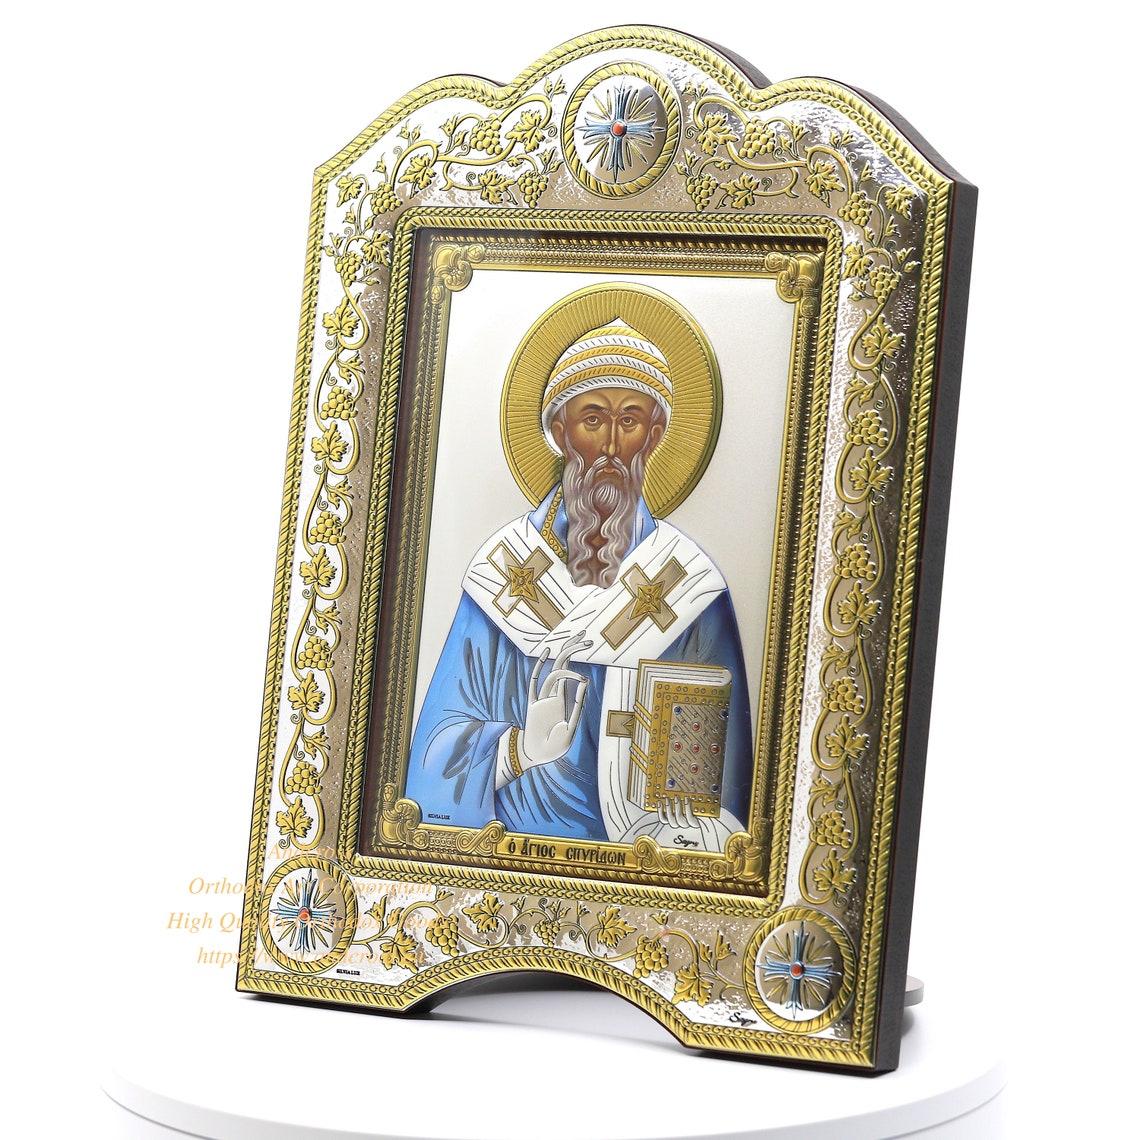 The Great Miraculous Christian Orthodox Silver Icon The Saint Spyridon Bishop of Trimythous 21×28/Gold and silver version/Frame with glass. B105|The Great Miraculous Christian Orthodox Silver Icon The Saint Spyridon Bishop of Trimythous 21×28/Gold and silver version/Frame with glass. B105|The Great Miraculous Christian Orthodox Silver Icon The Saint Spyridon Bishop of Trimythous 21×28/Gold and silver version/Frame with glass. B105|The Great Miraculous Christian Orthodox Silver Icon The Saint Spyridon Bishop of Trimythous 21×28/Gold and silver version/Frame with glass. B105|The Great Miraculous Christian Orthodox Silver Icon The Saint Spyridon Bishop of Trimythous 21×28/Gold and silver version/Frame with glass. B105